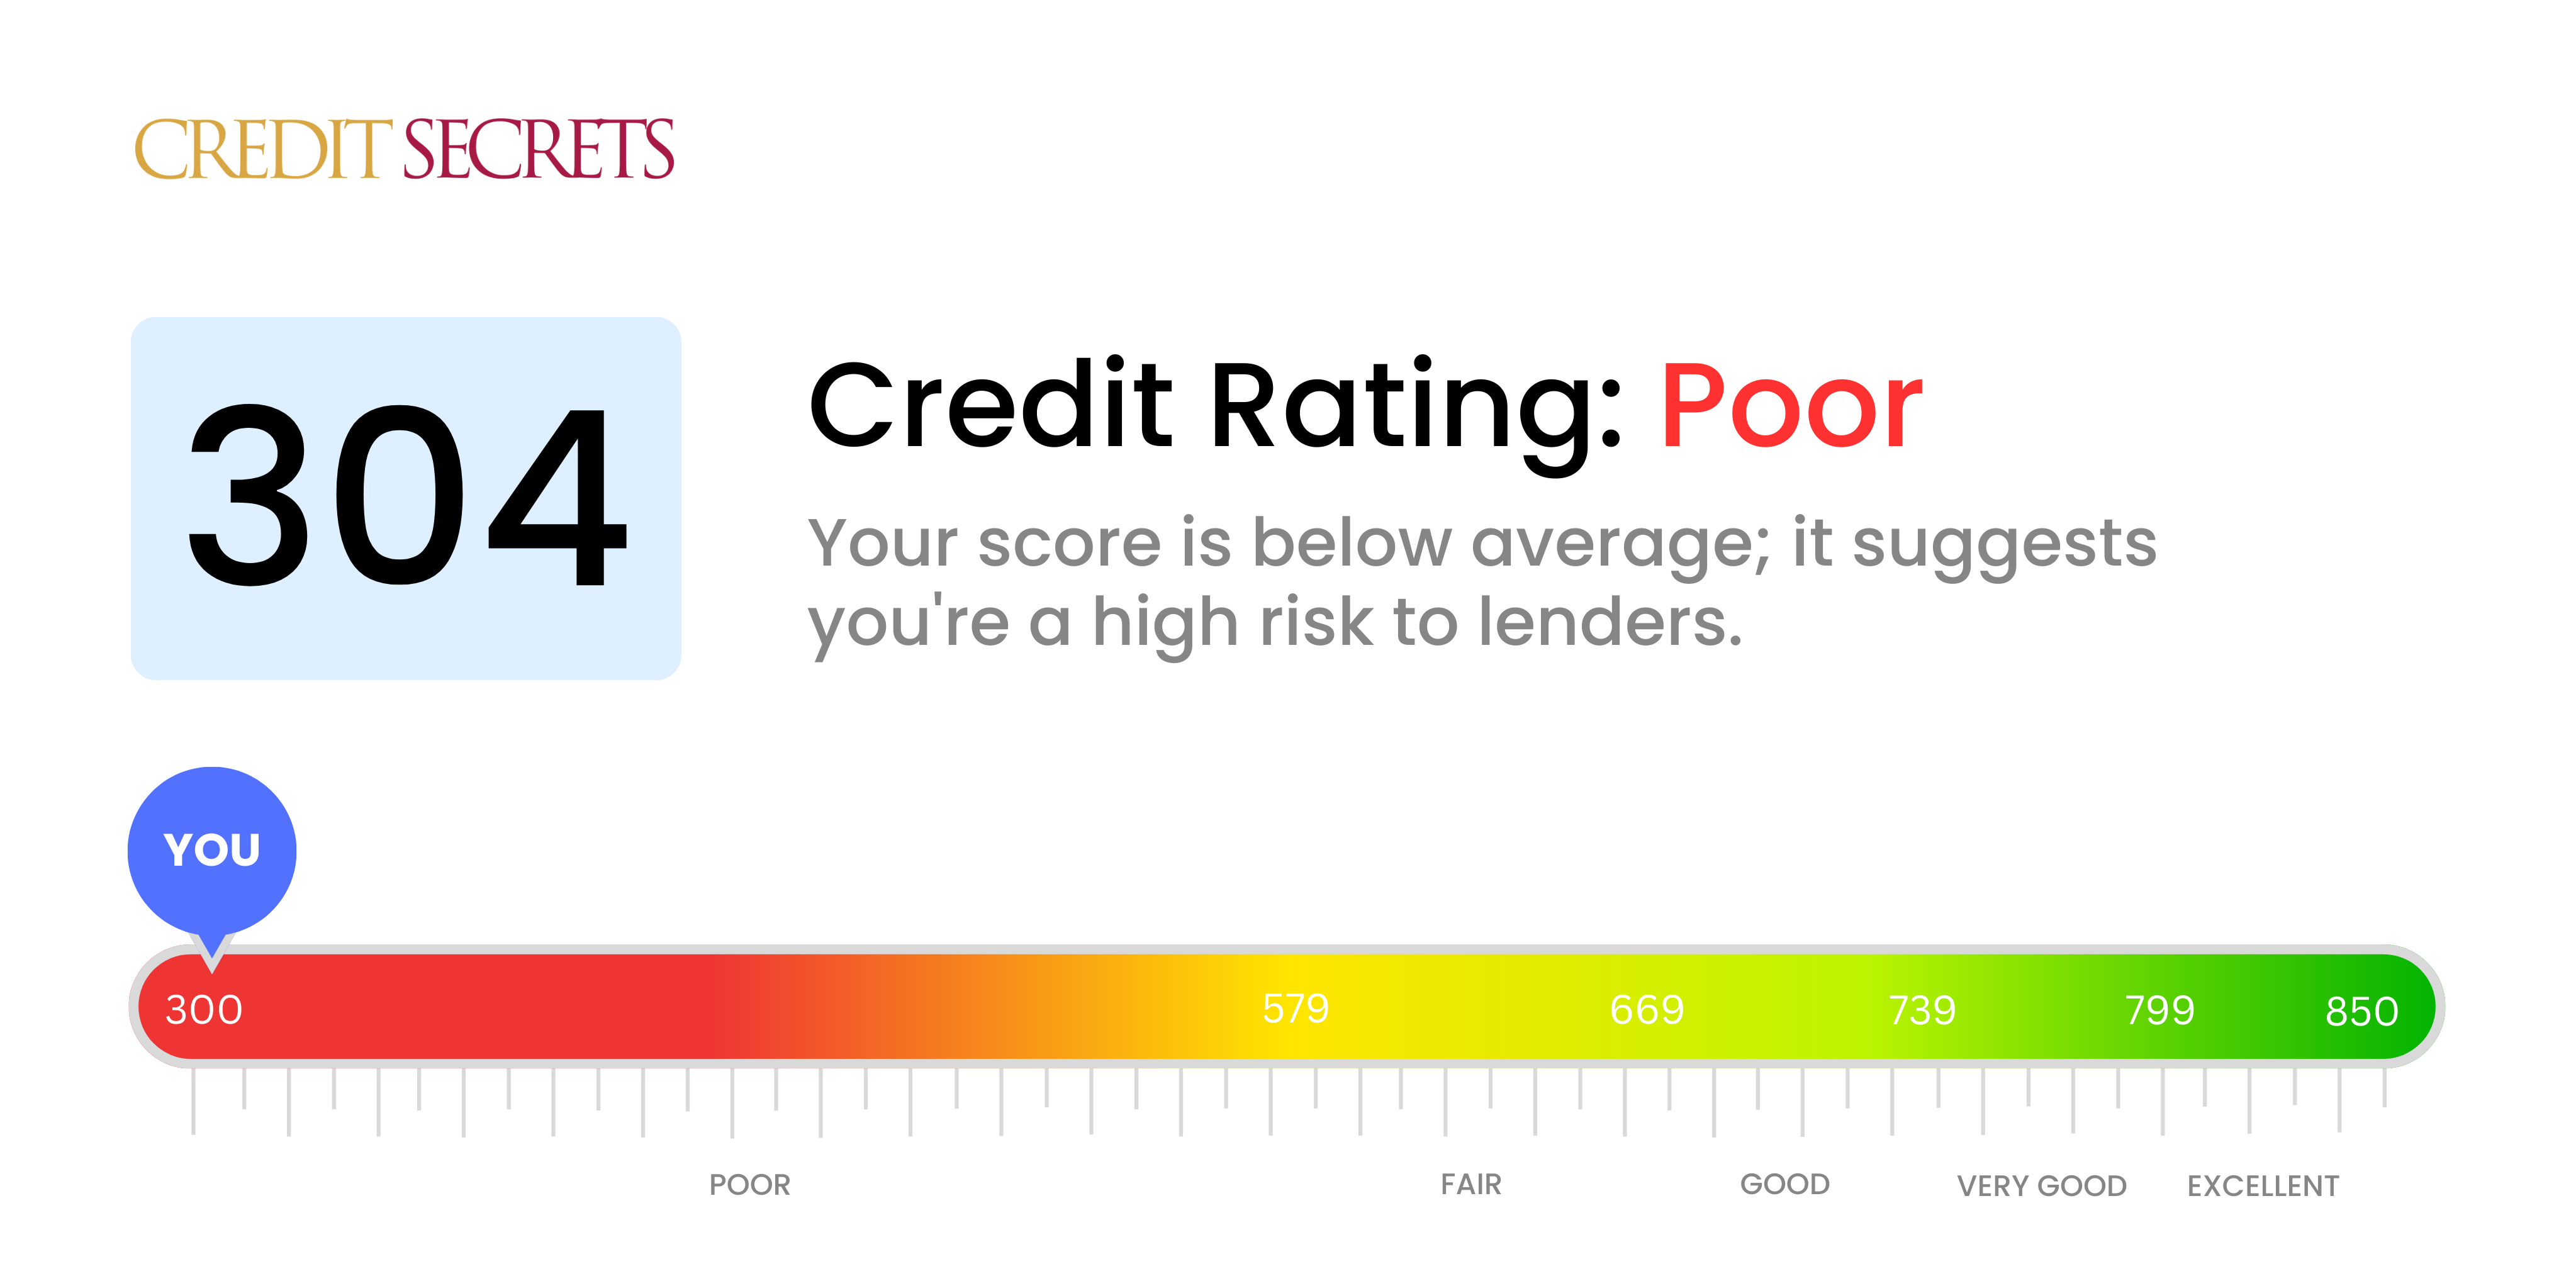 Is 304 a good credit score?